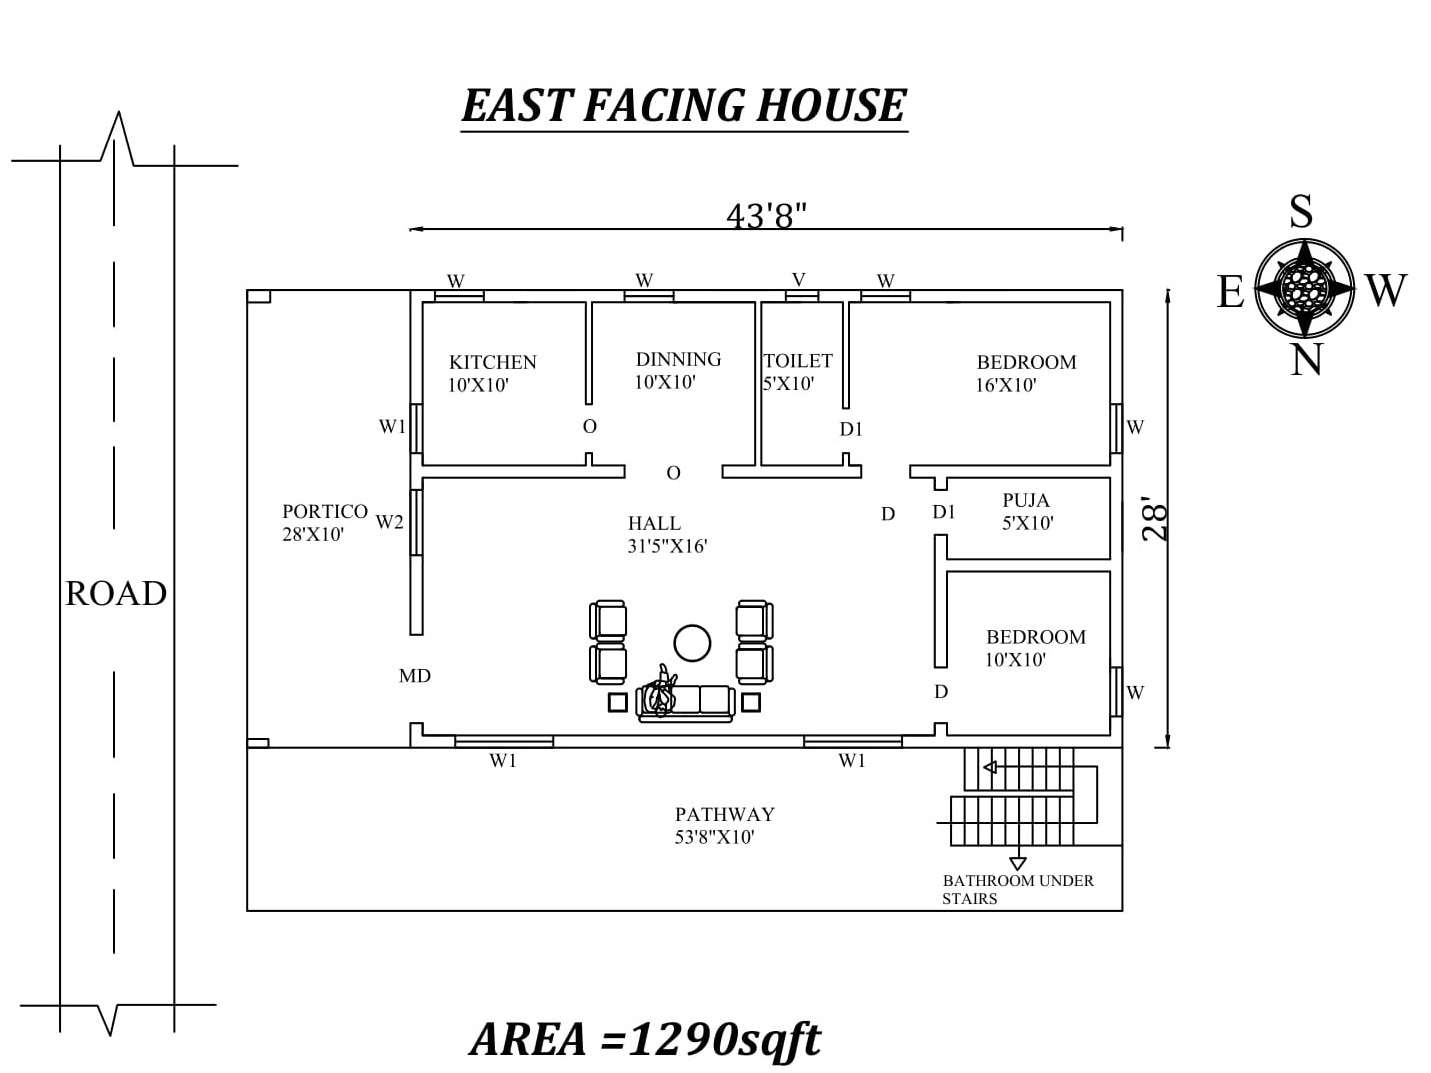 43'8"x28' The Perfect 2bhk East facing House Plan As Per